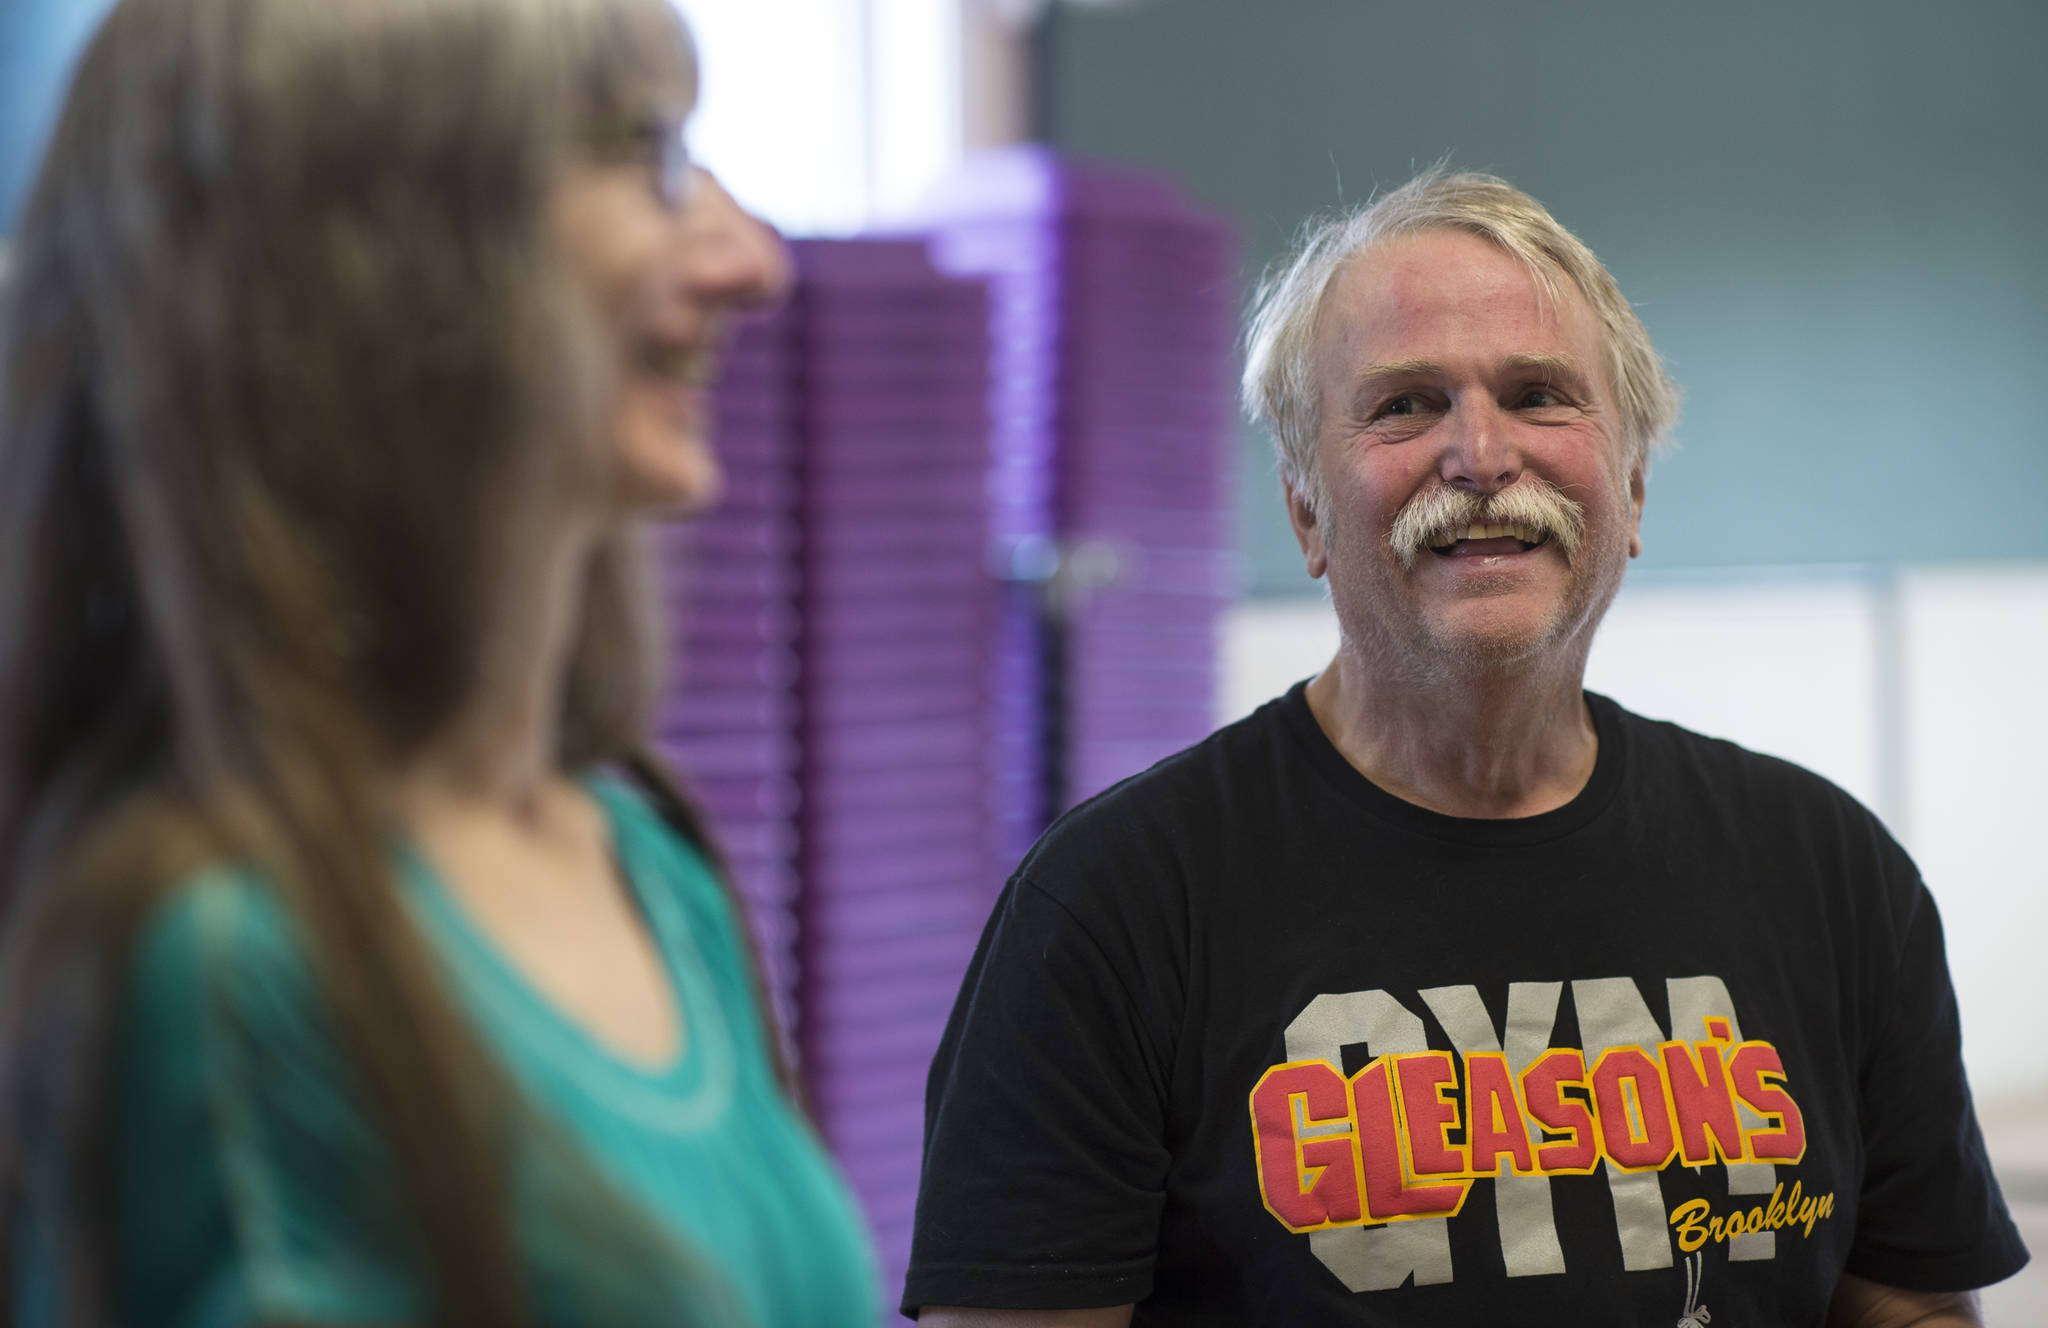 Richard Steele and his wife, Luann McVey, share a light moment while attending his workout at the Rock Steady Boxing Class at Pavitt Health & Fitness on Thursday, April 12, 2018. (Michael Penn | Juneau Empire)